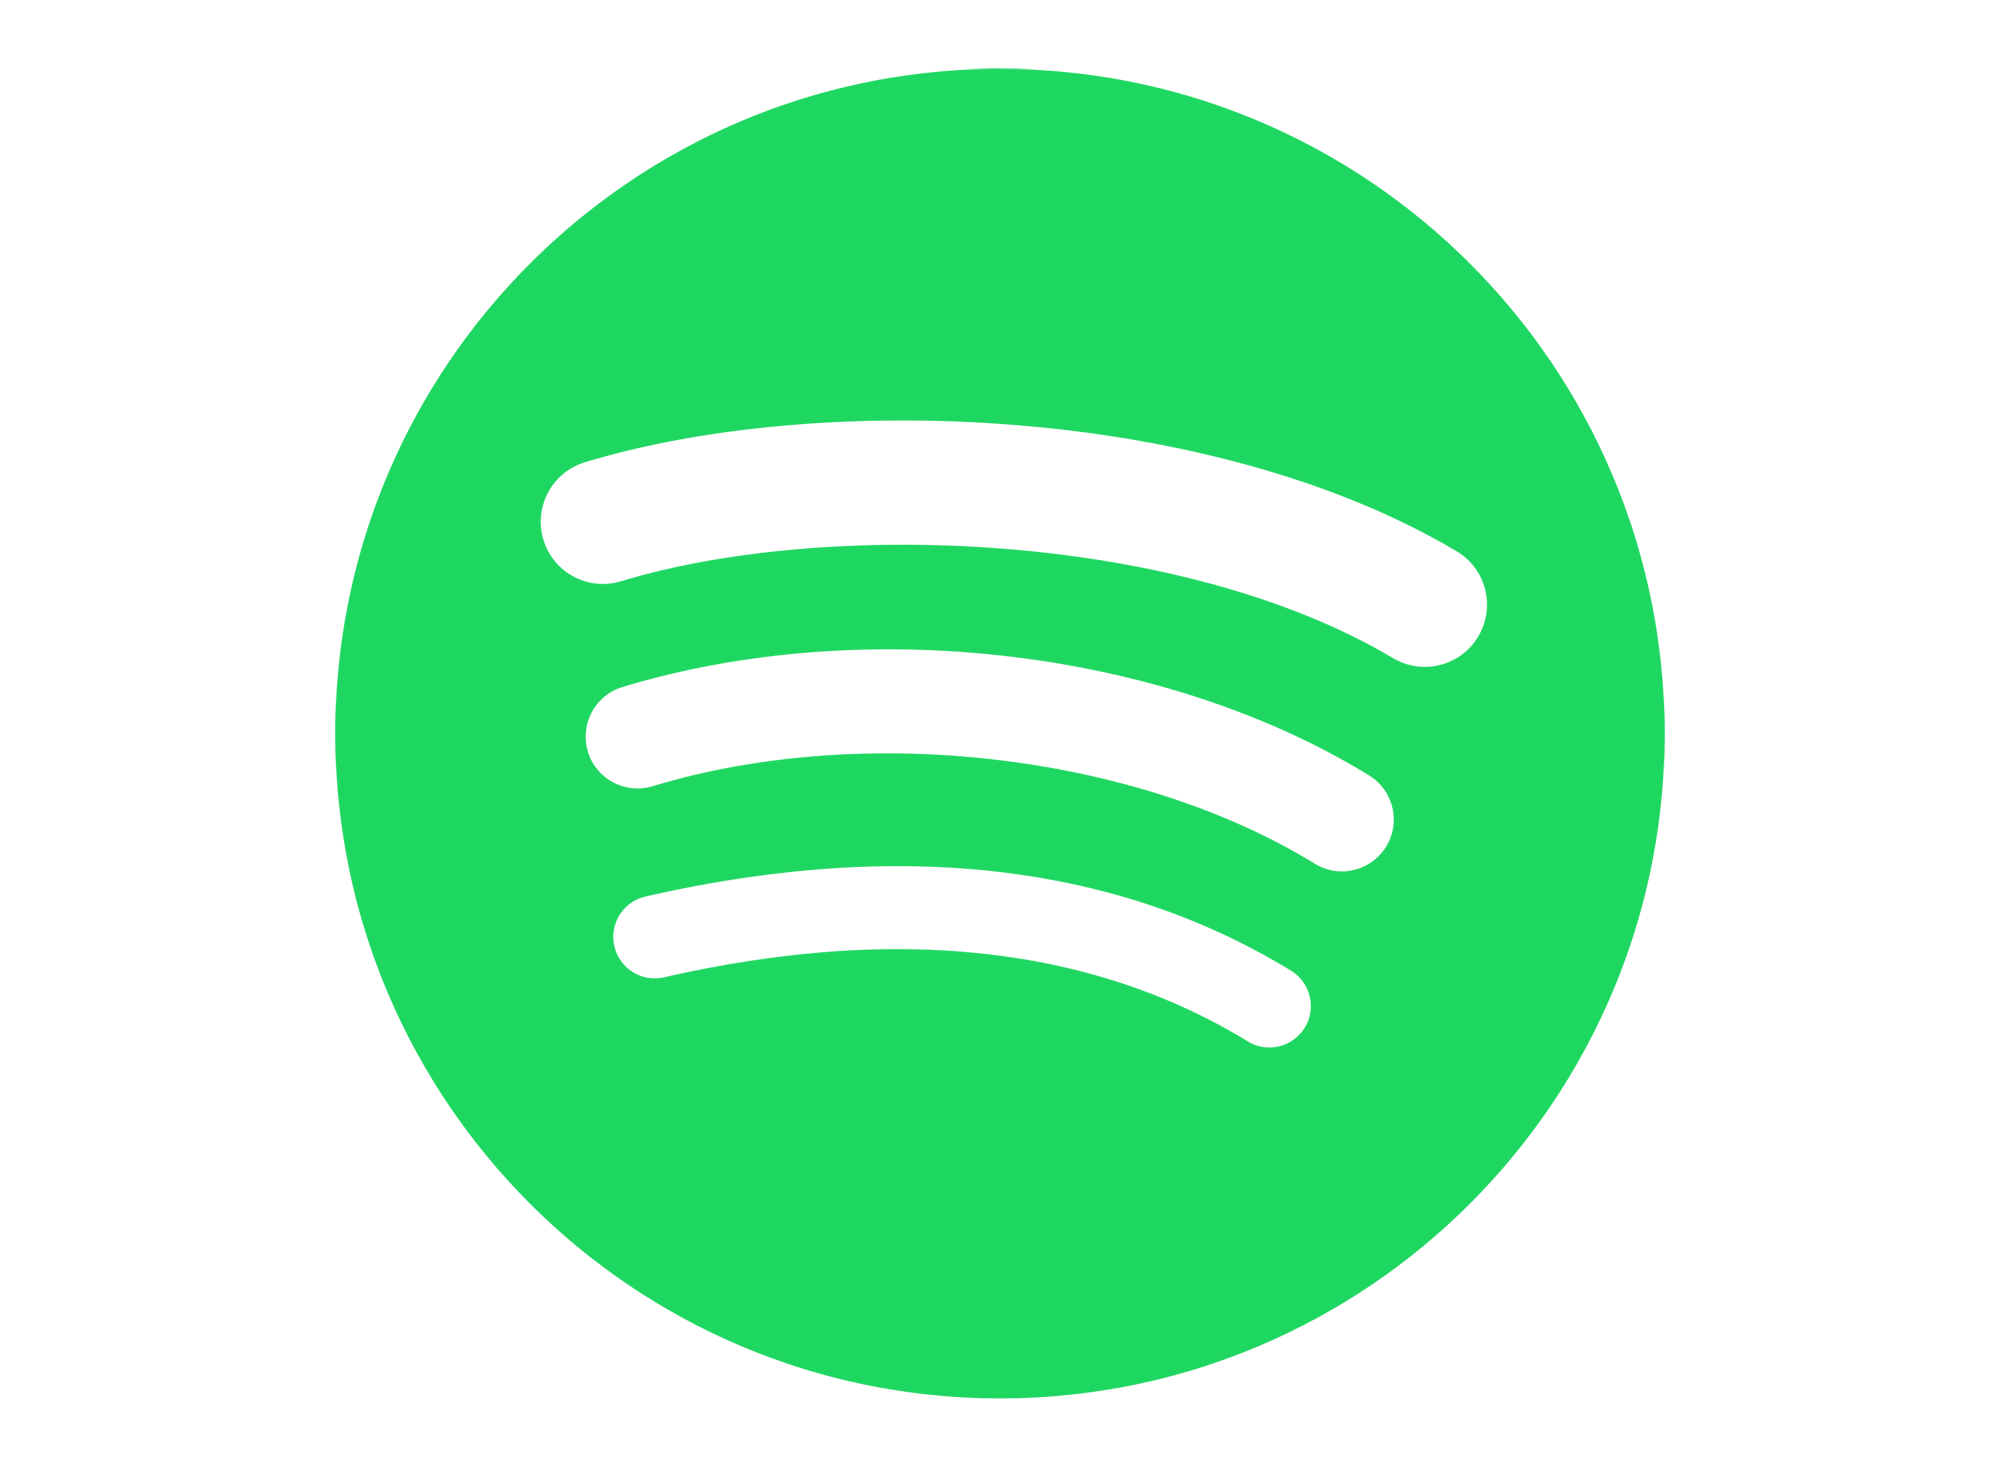 Logo Spotify PNG, Vector, PSD, and Clipart With Transparent